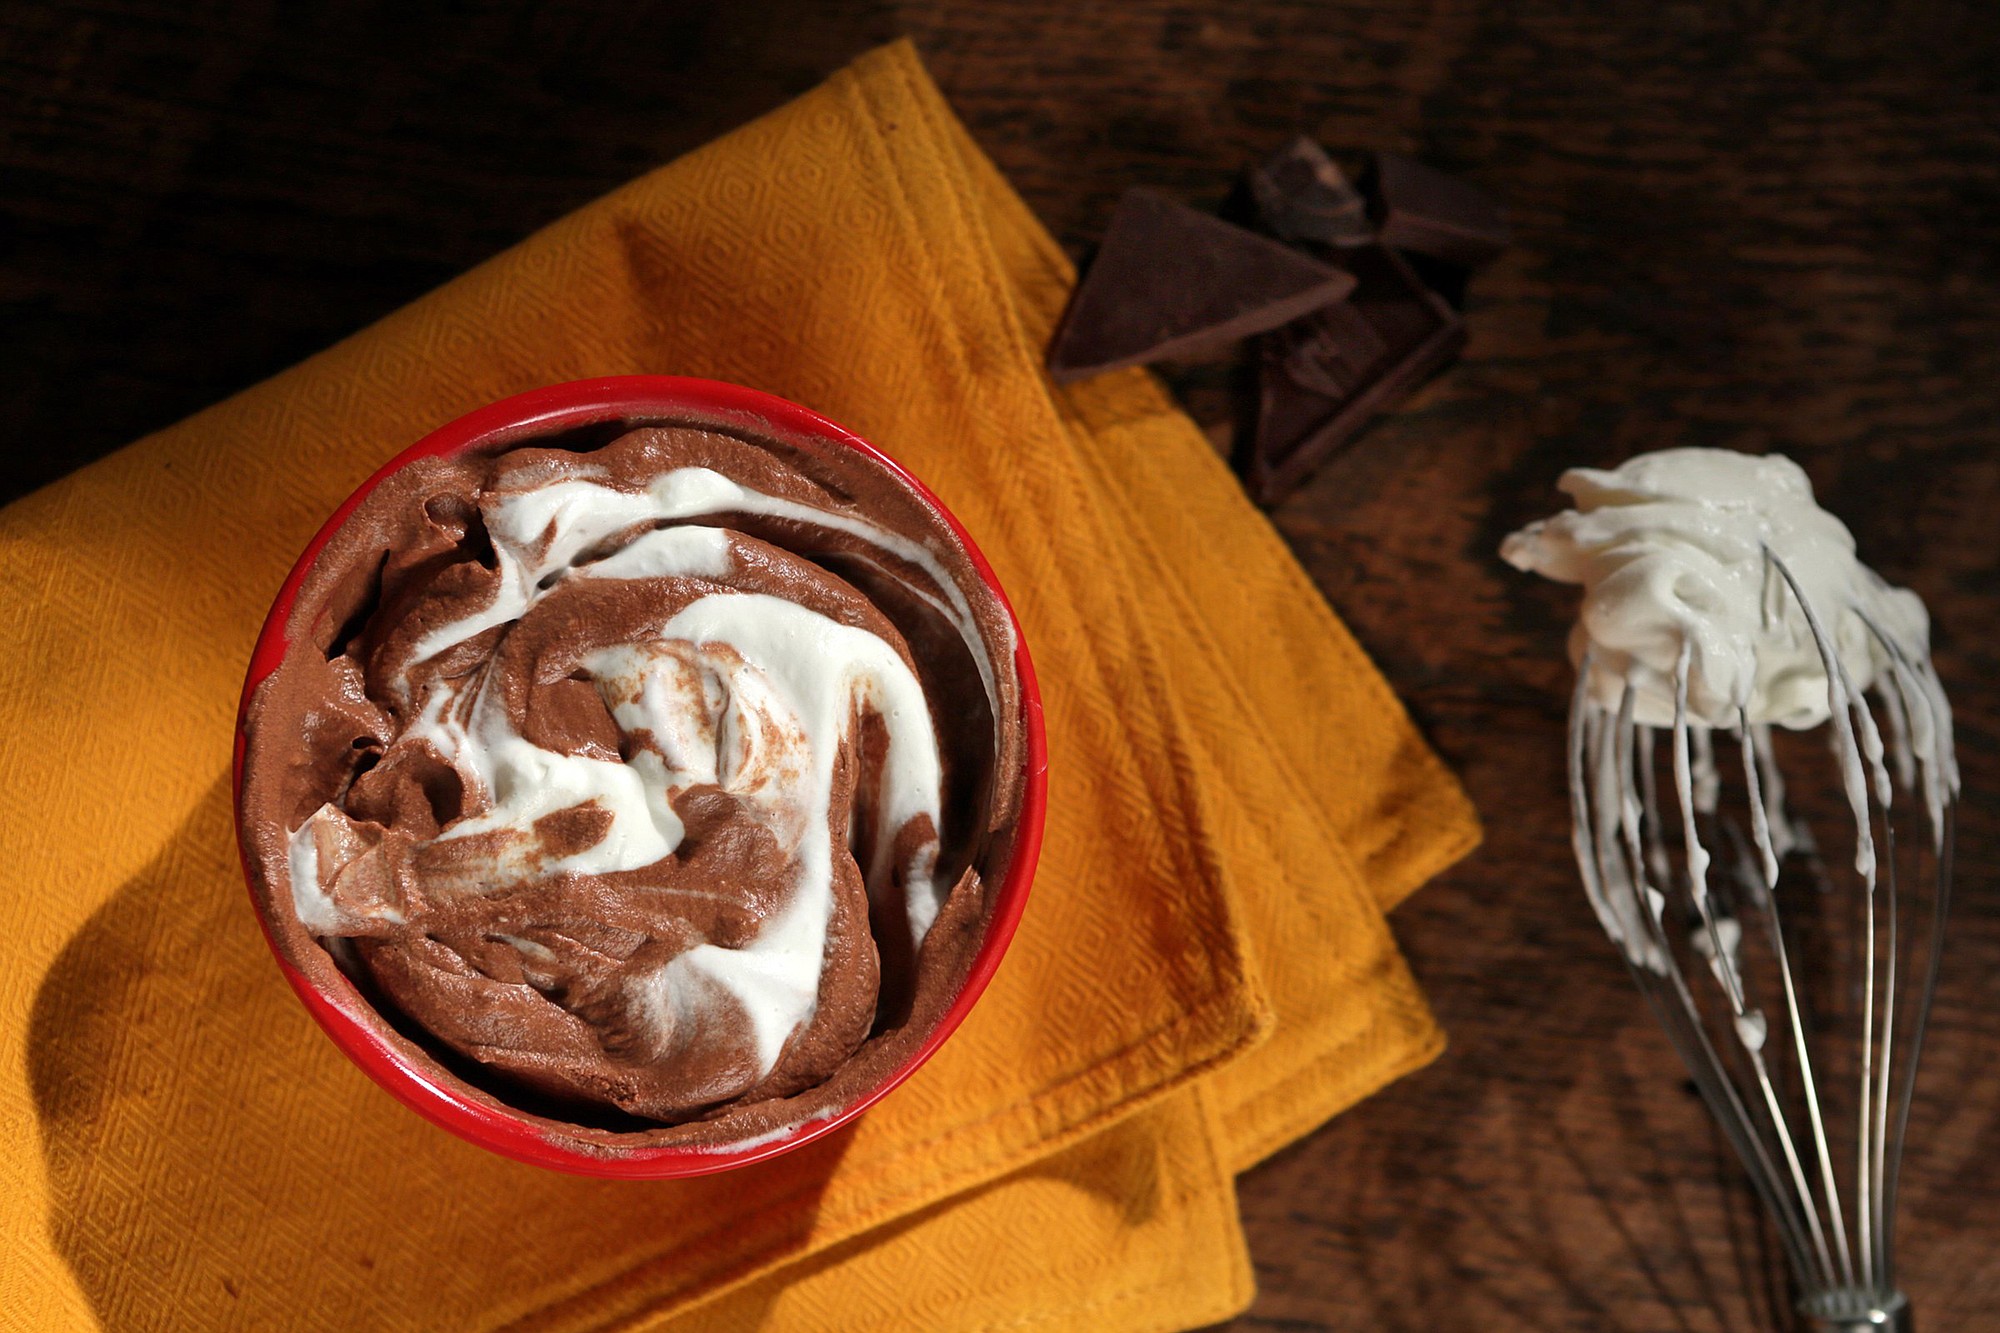 Chocolate mousse swirled with whipped cream.